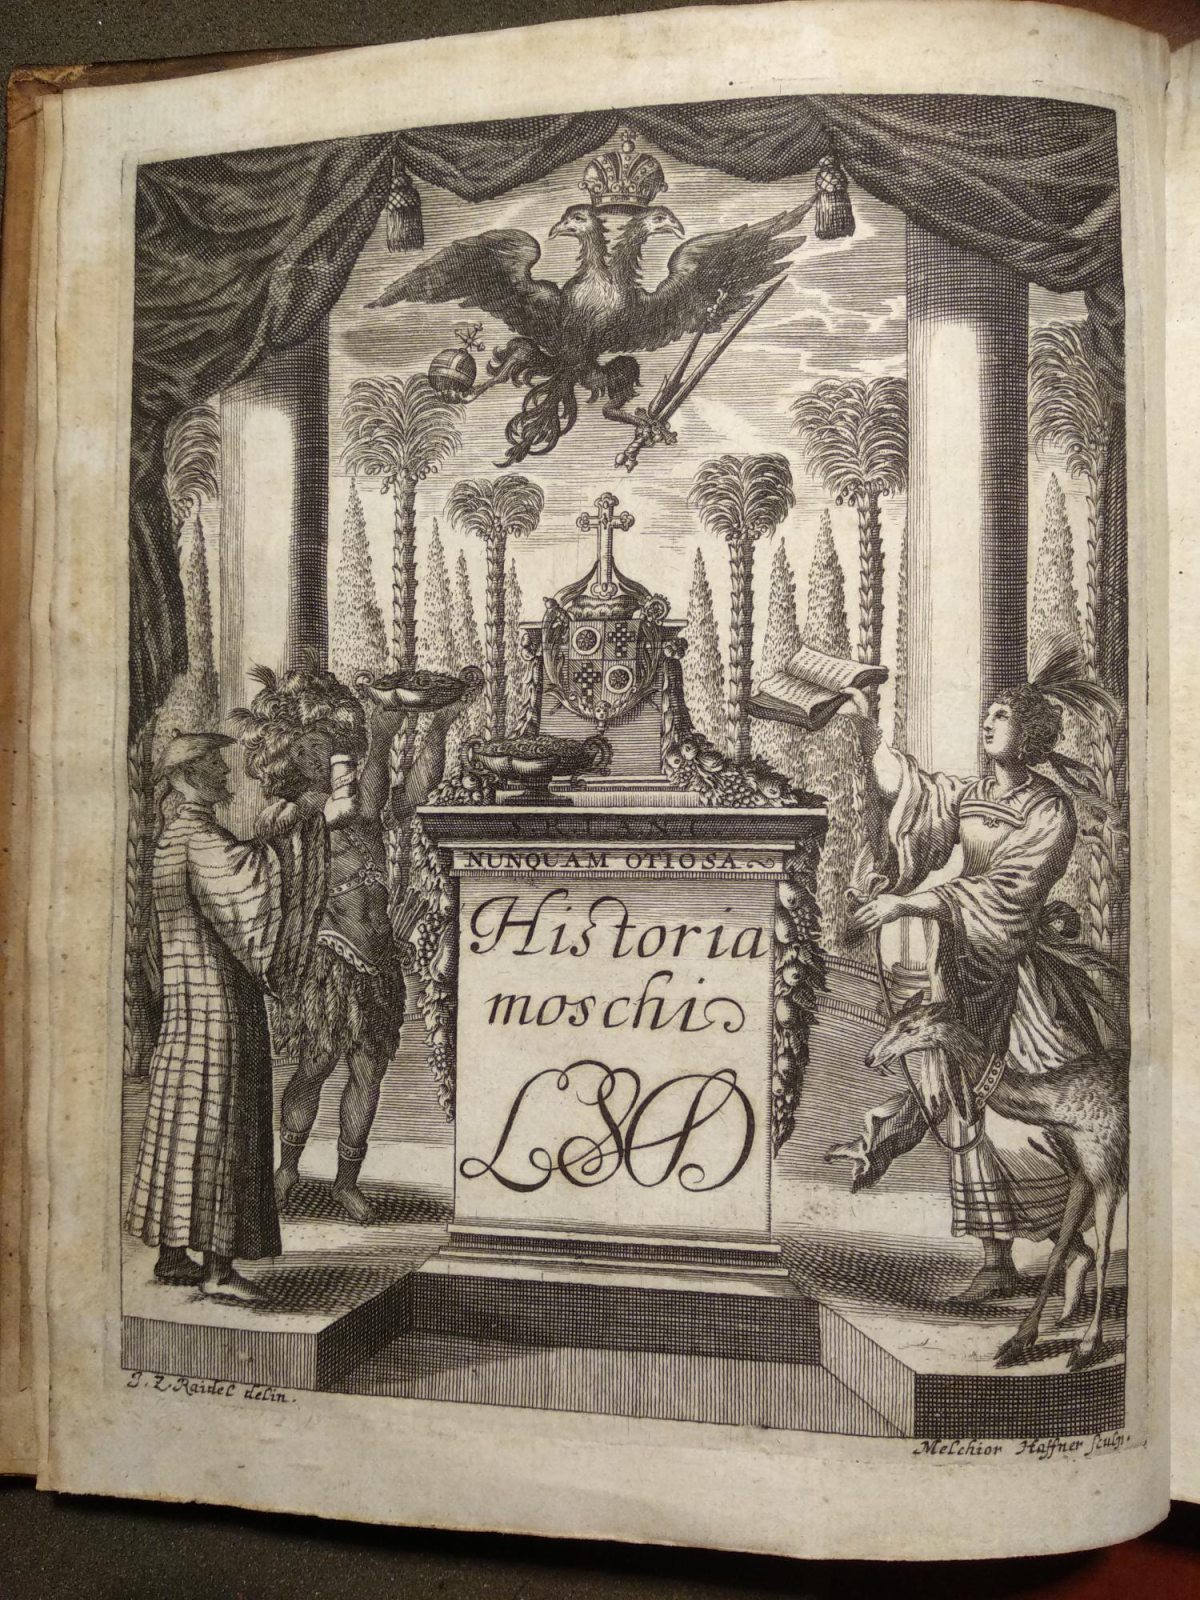 A pictoral title page for Historia Moschi